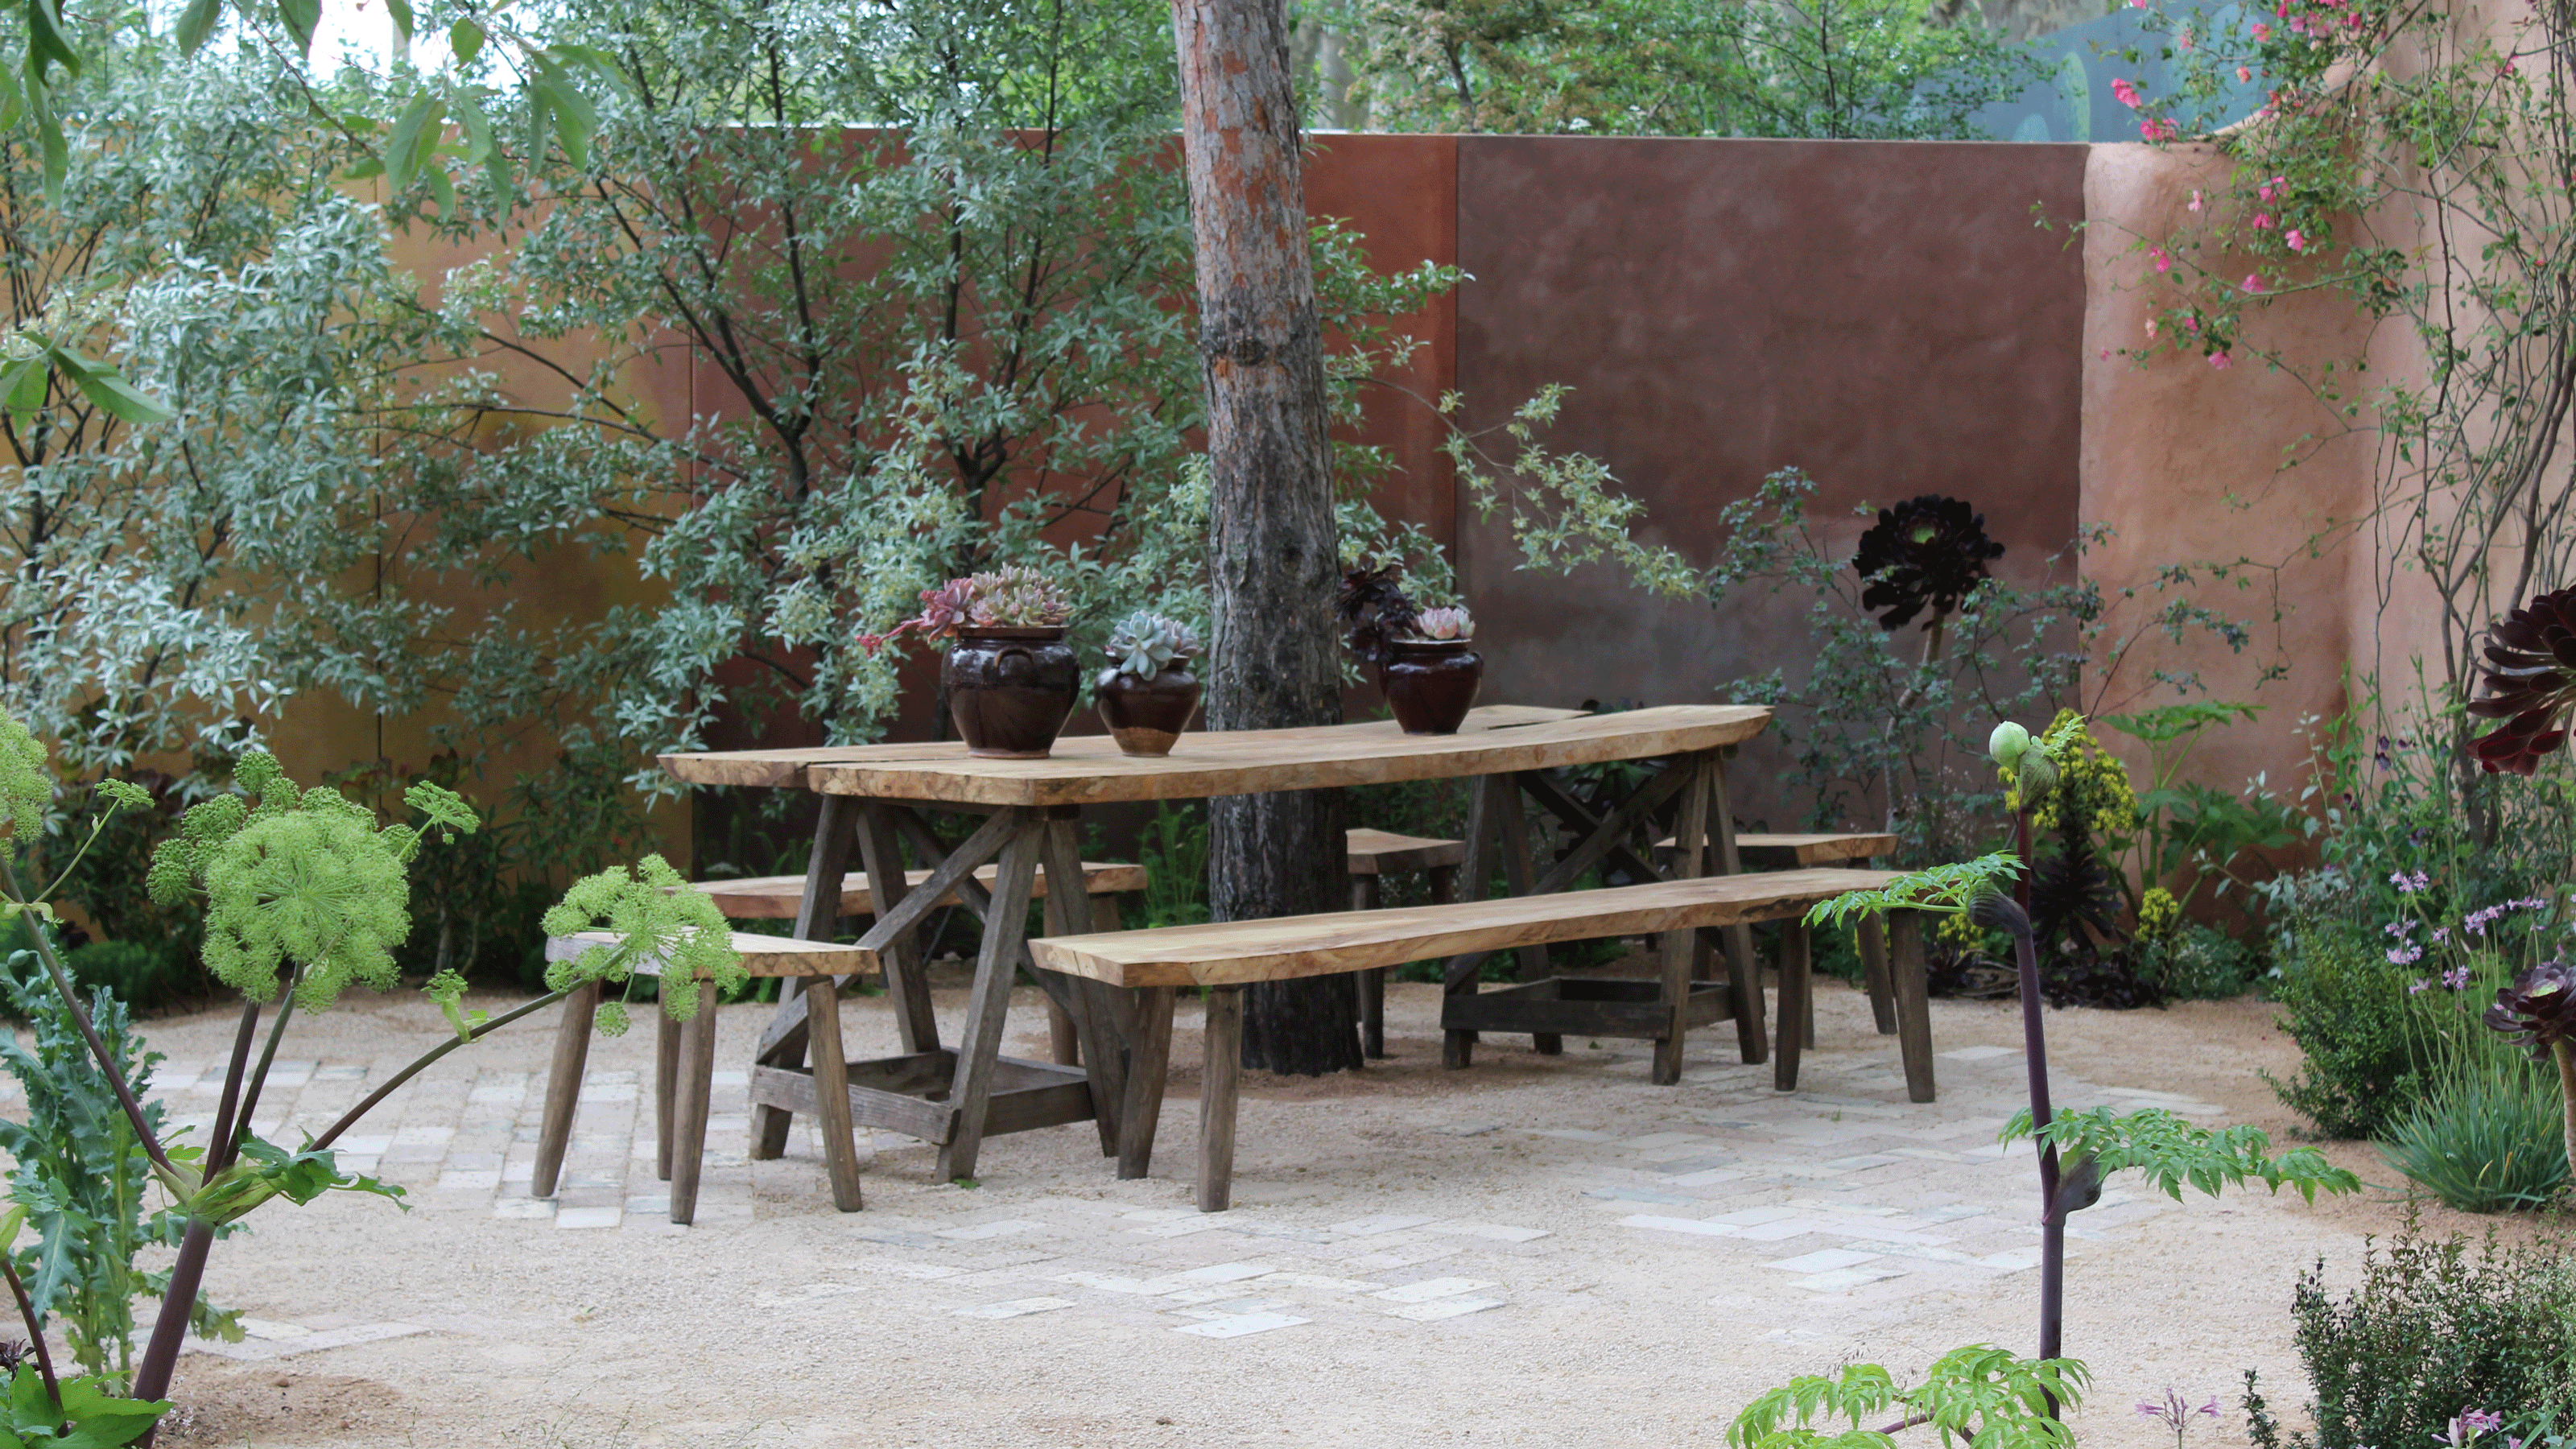 wooden outdoor dining set at chelsea flower show